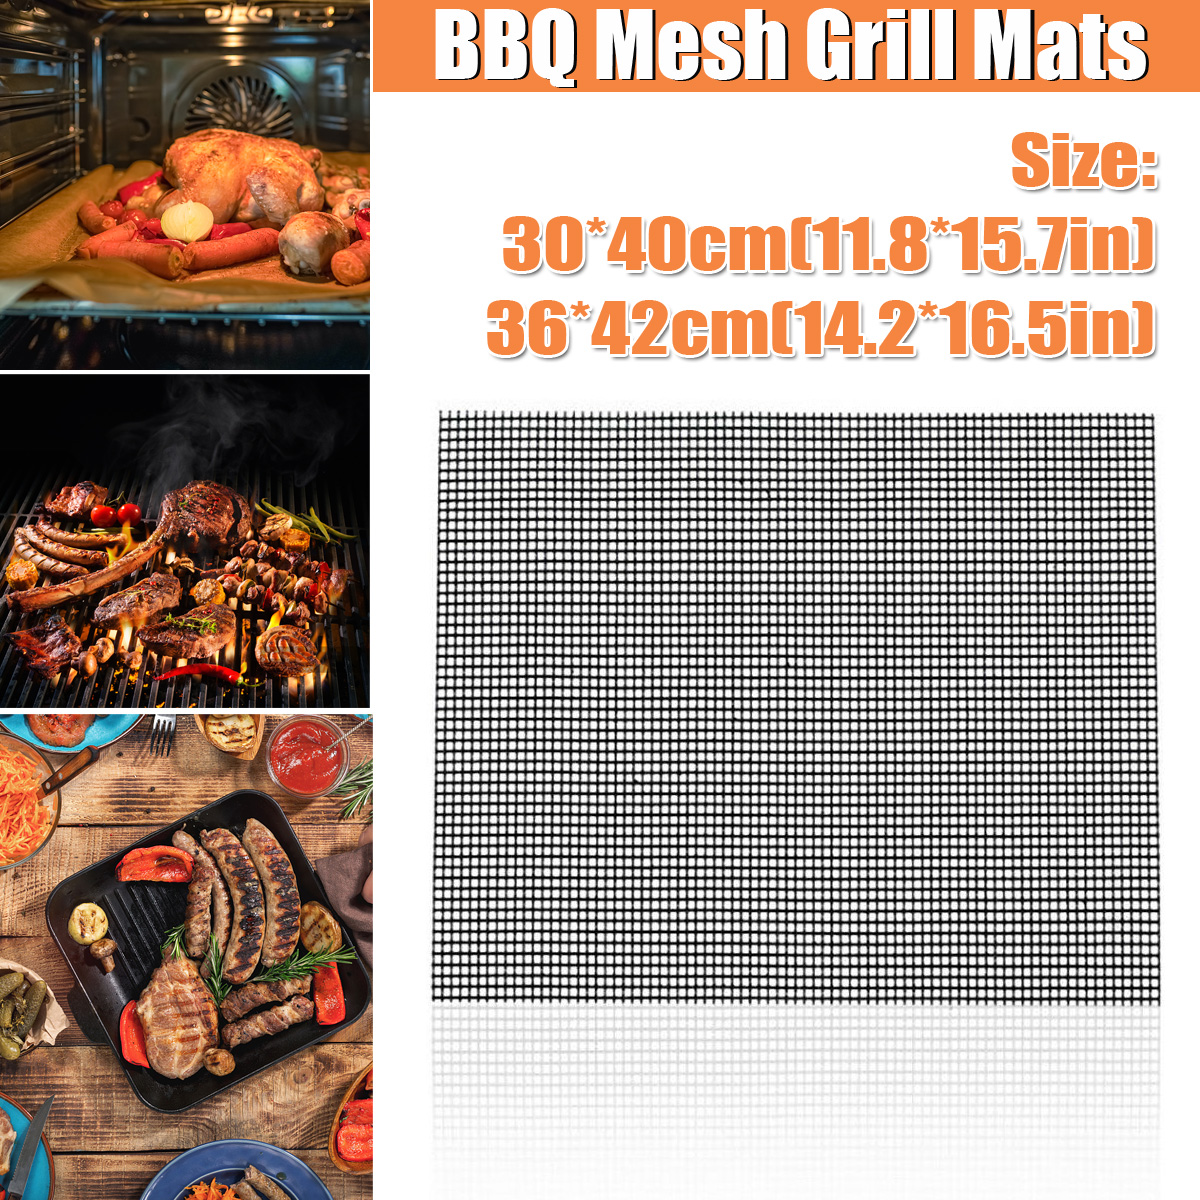 Home-Grill-Mat-BBQ-Grill-Mesh-Mat-Non-Stick-Cooking-Sheet-Liner-Fish-Camping-1768271